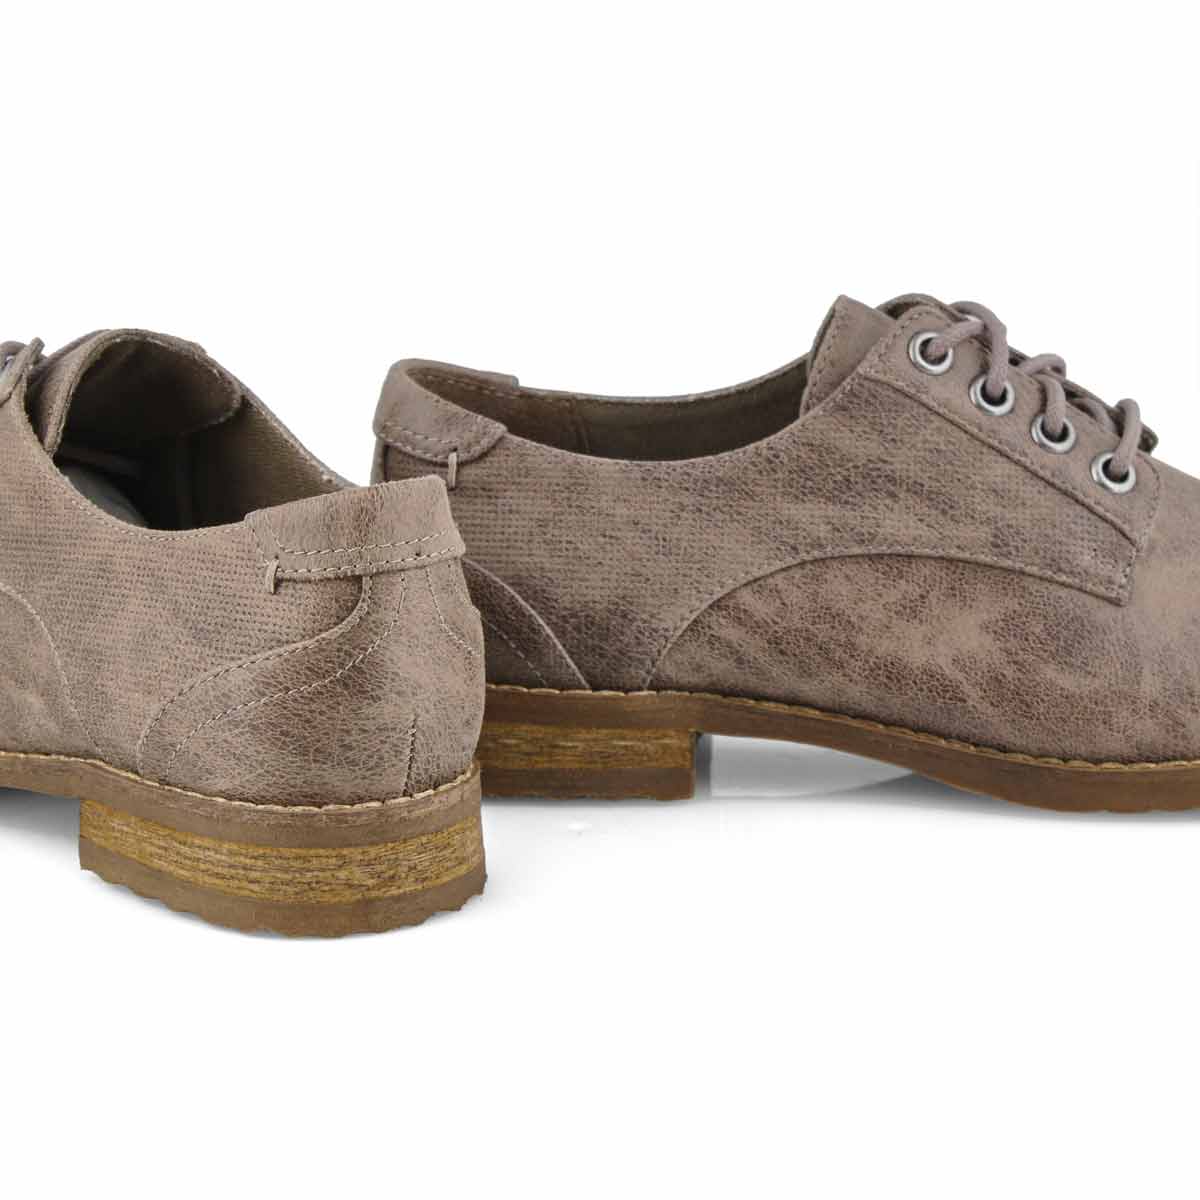 Women's Meghan Lace Up Oxford - Taupe